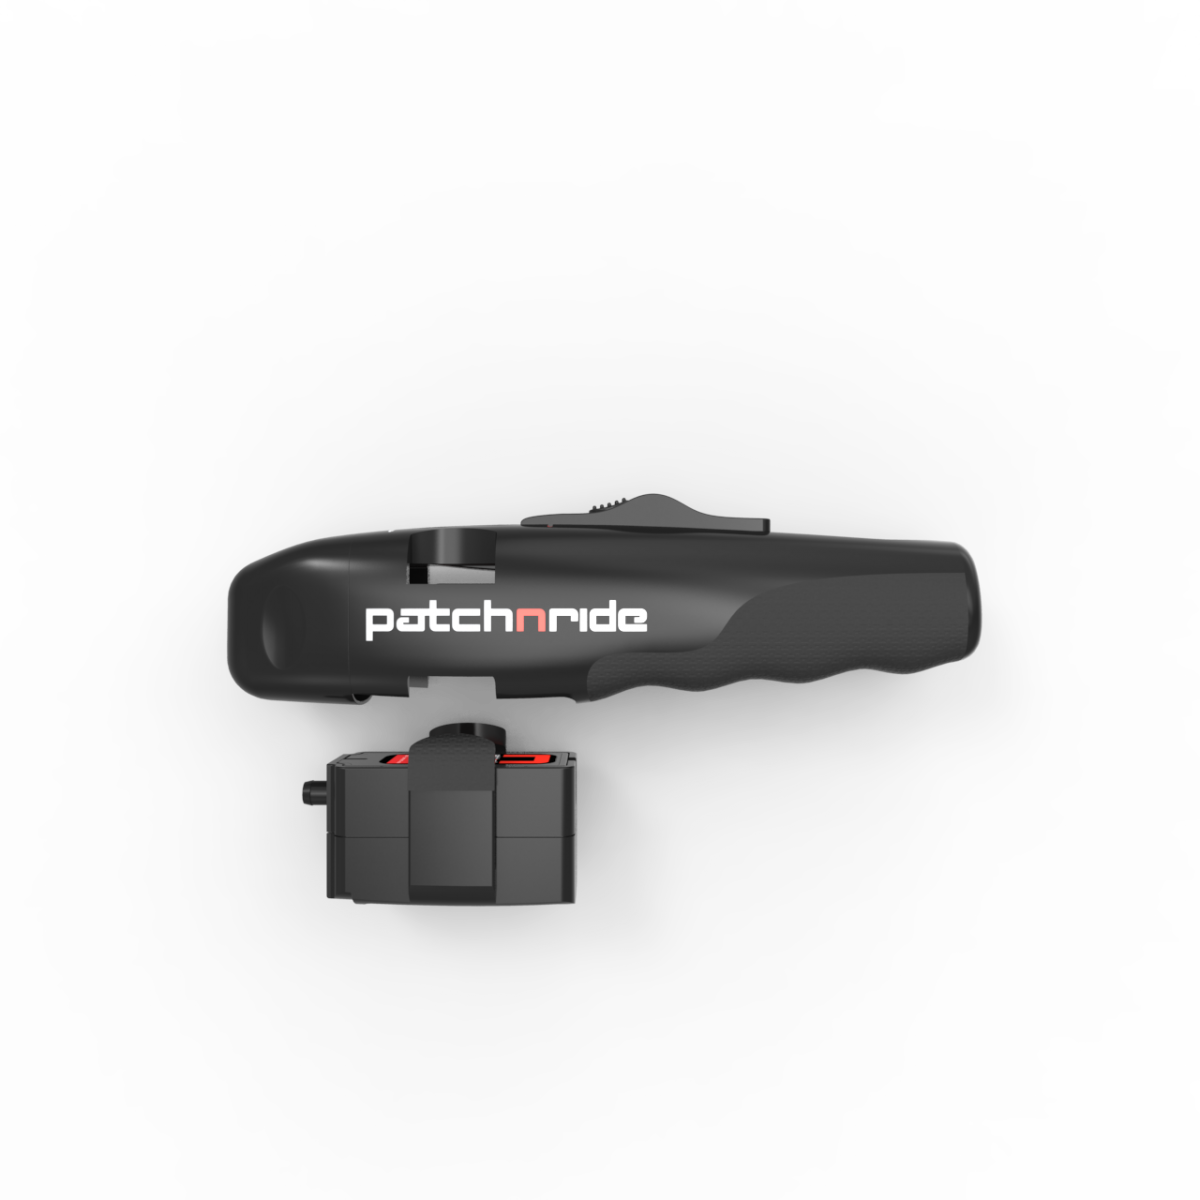 patchnride and patch pod 3